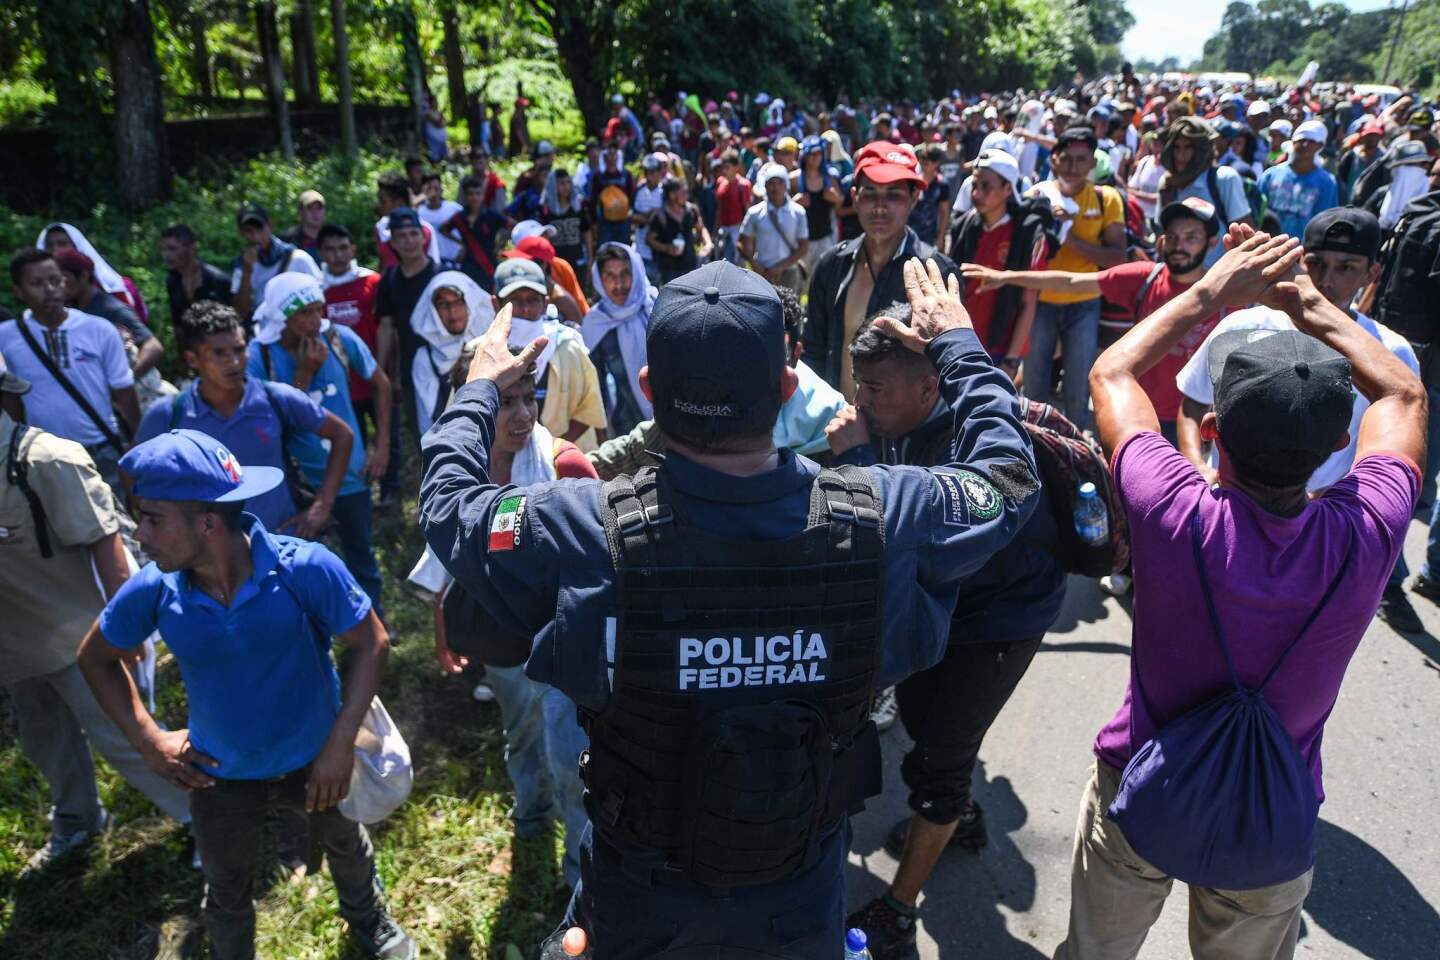 A Mexican federal police officer speaks with Honduran migrants heading in a caravan to the U.S. on the road linking Ciudad Hidalgo and Tapachula, Mexico.